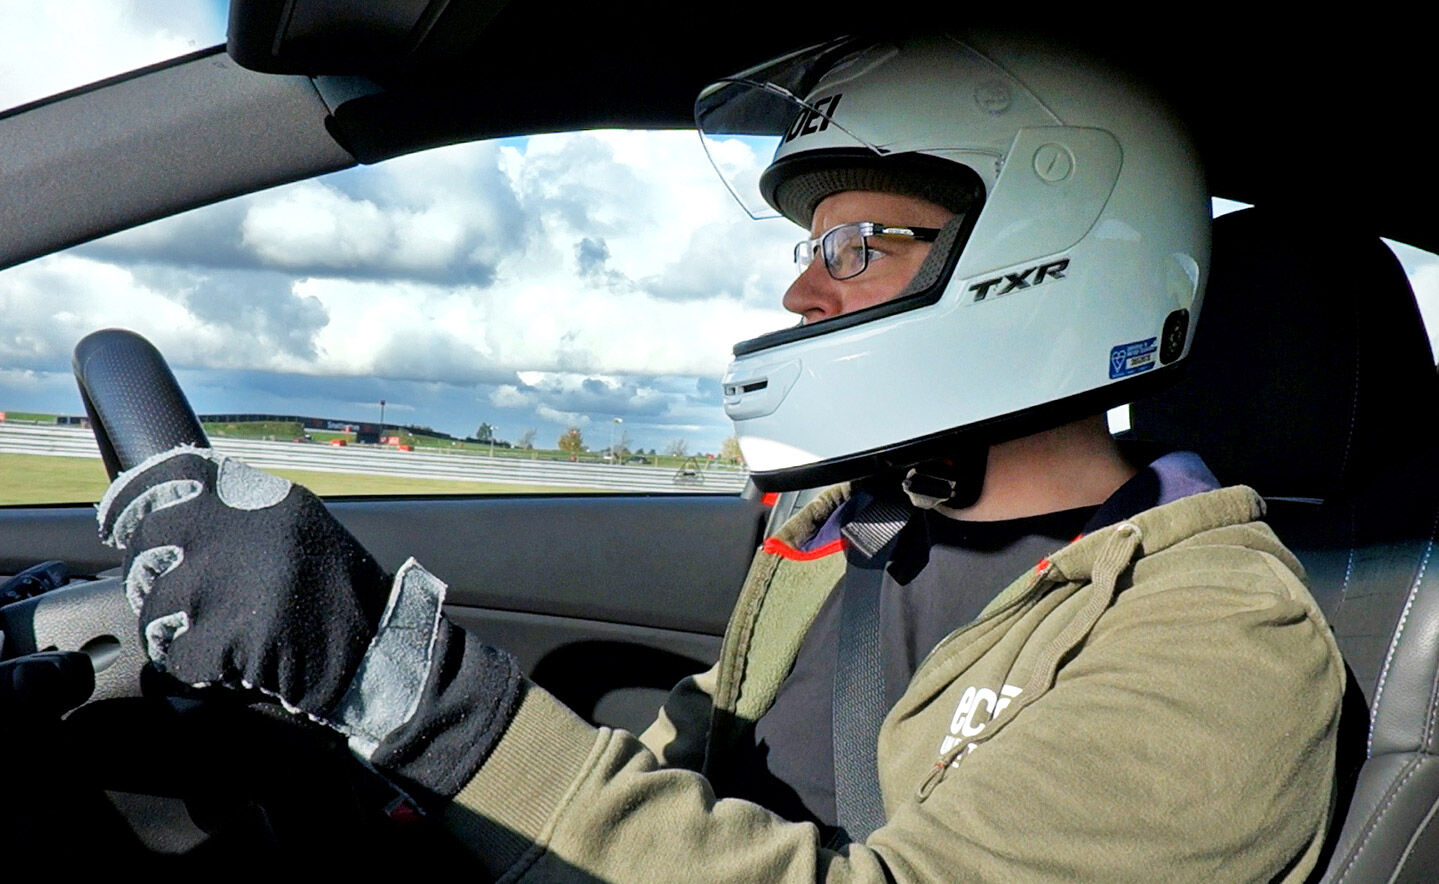 On track with the UK’s N-Thusiasts